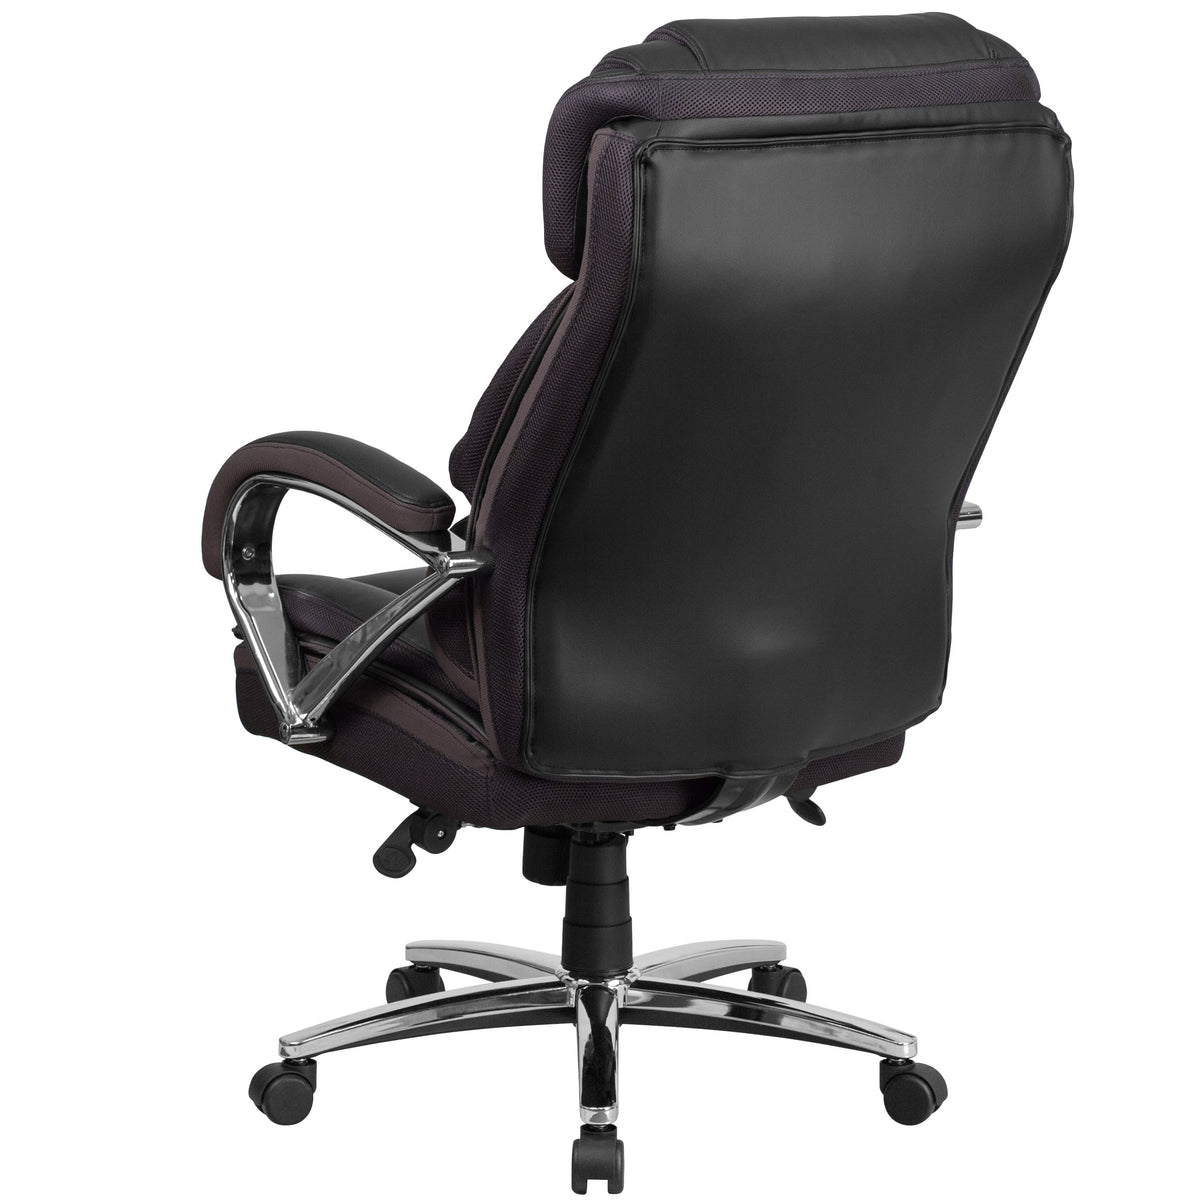 Big & Tall 500 lb. Rated Black LeatherSoft Ergonomic Office Chair w/ Chrome Base